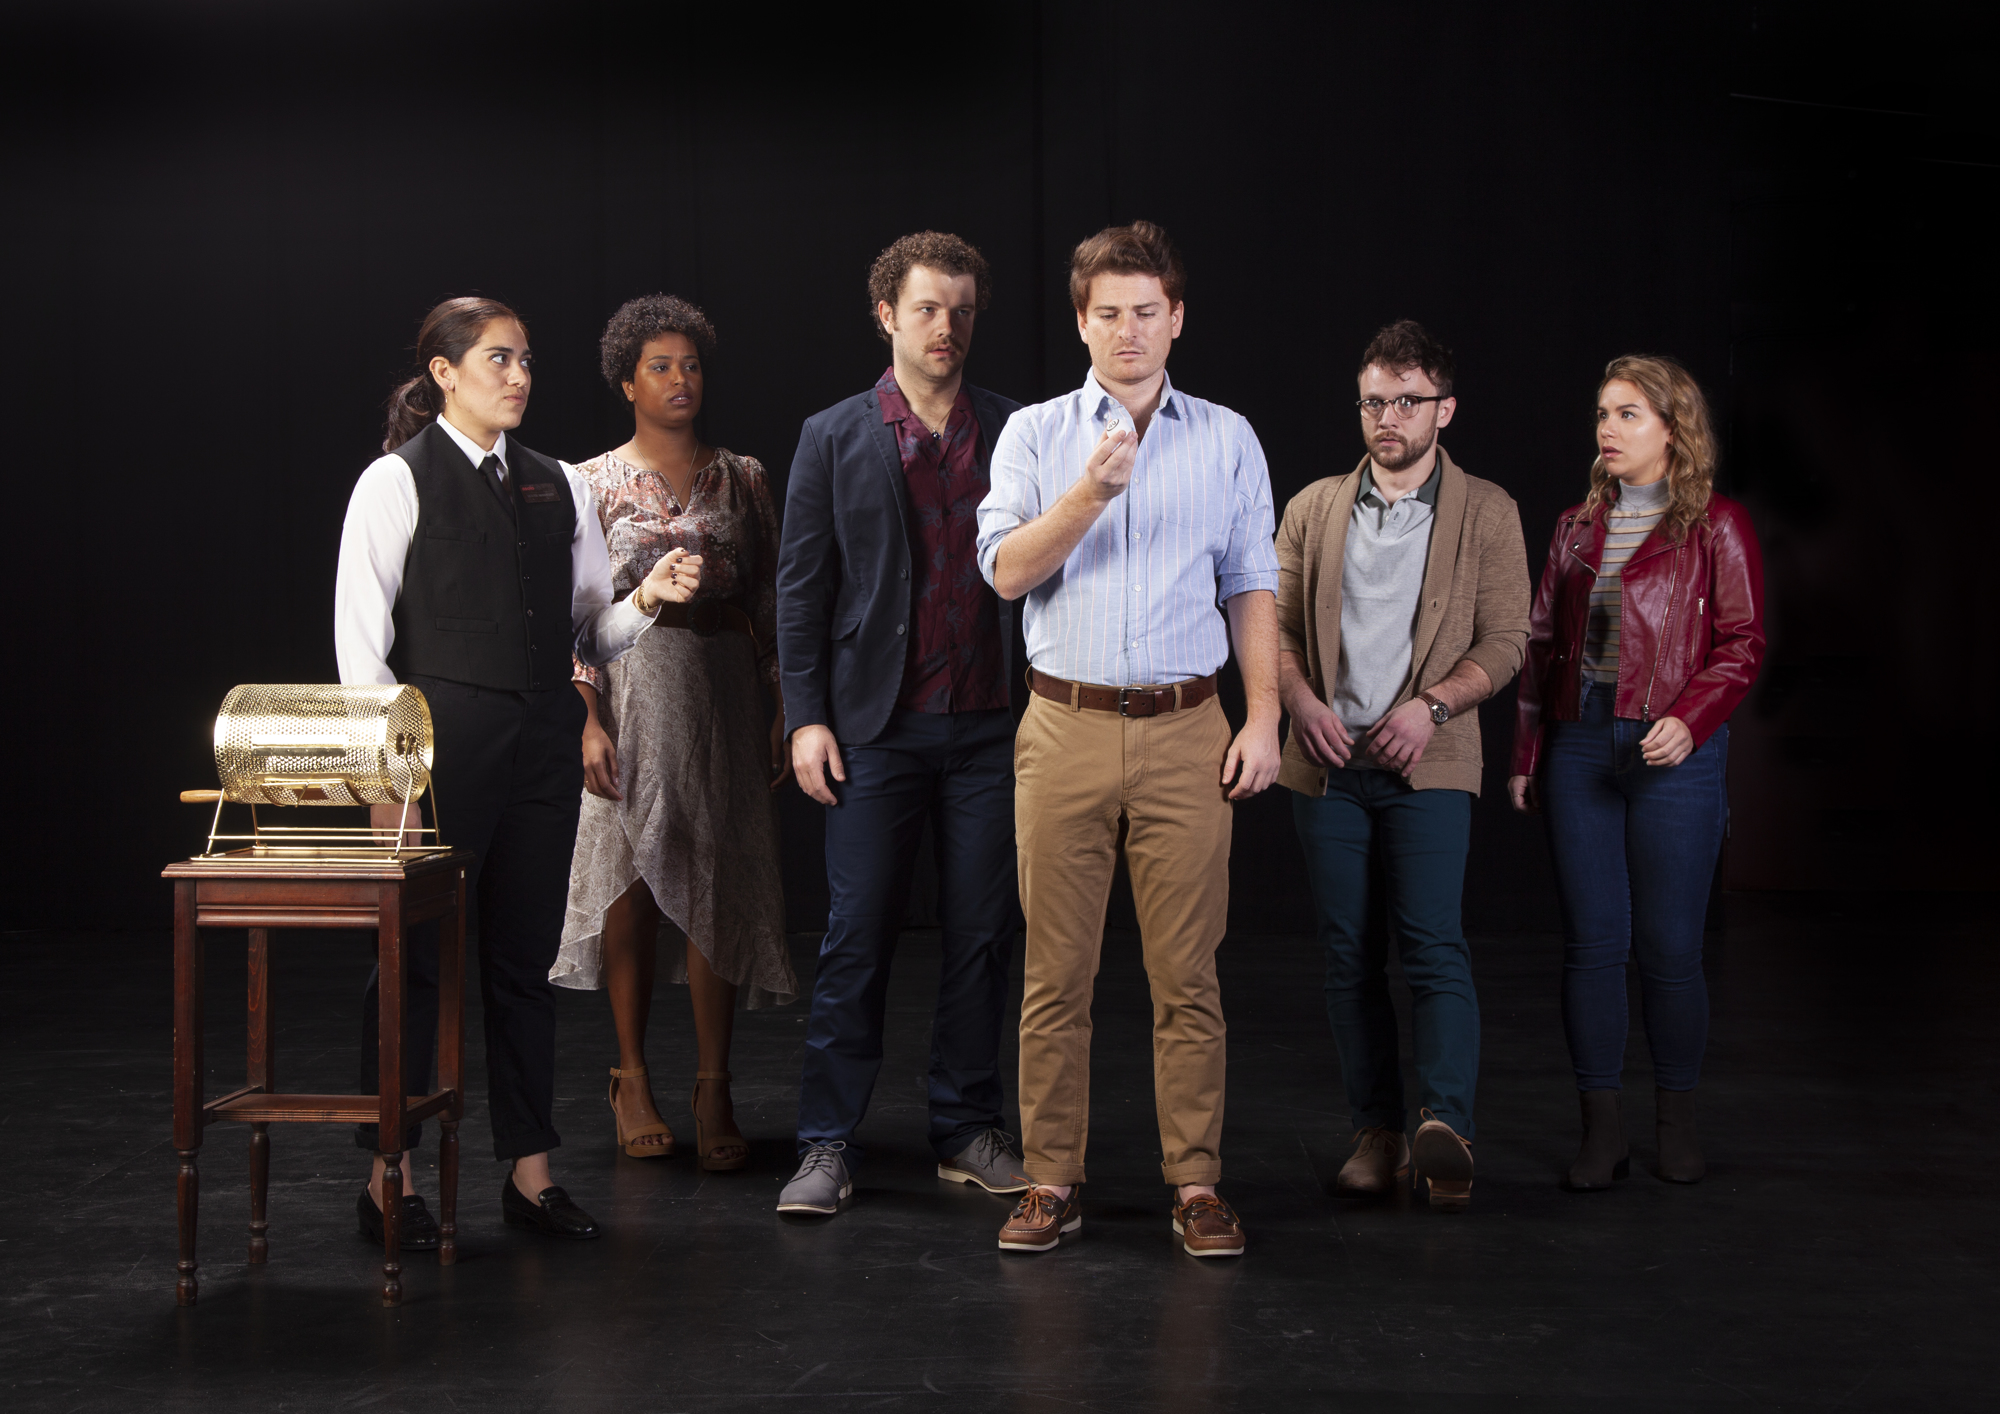 Second-year students Macaria Chaparro Martinez, Dreaa Baudy, Christian Douglass, Joe Ayers, Evan Stevens, and Erin O'Conner, stage the allegory of 